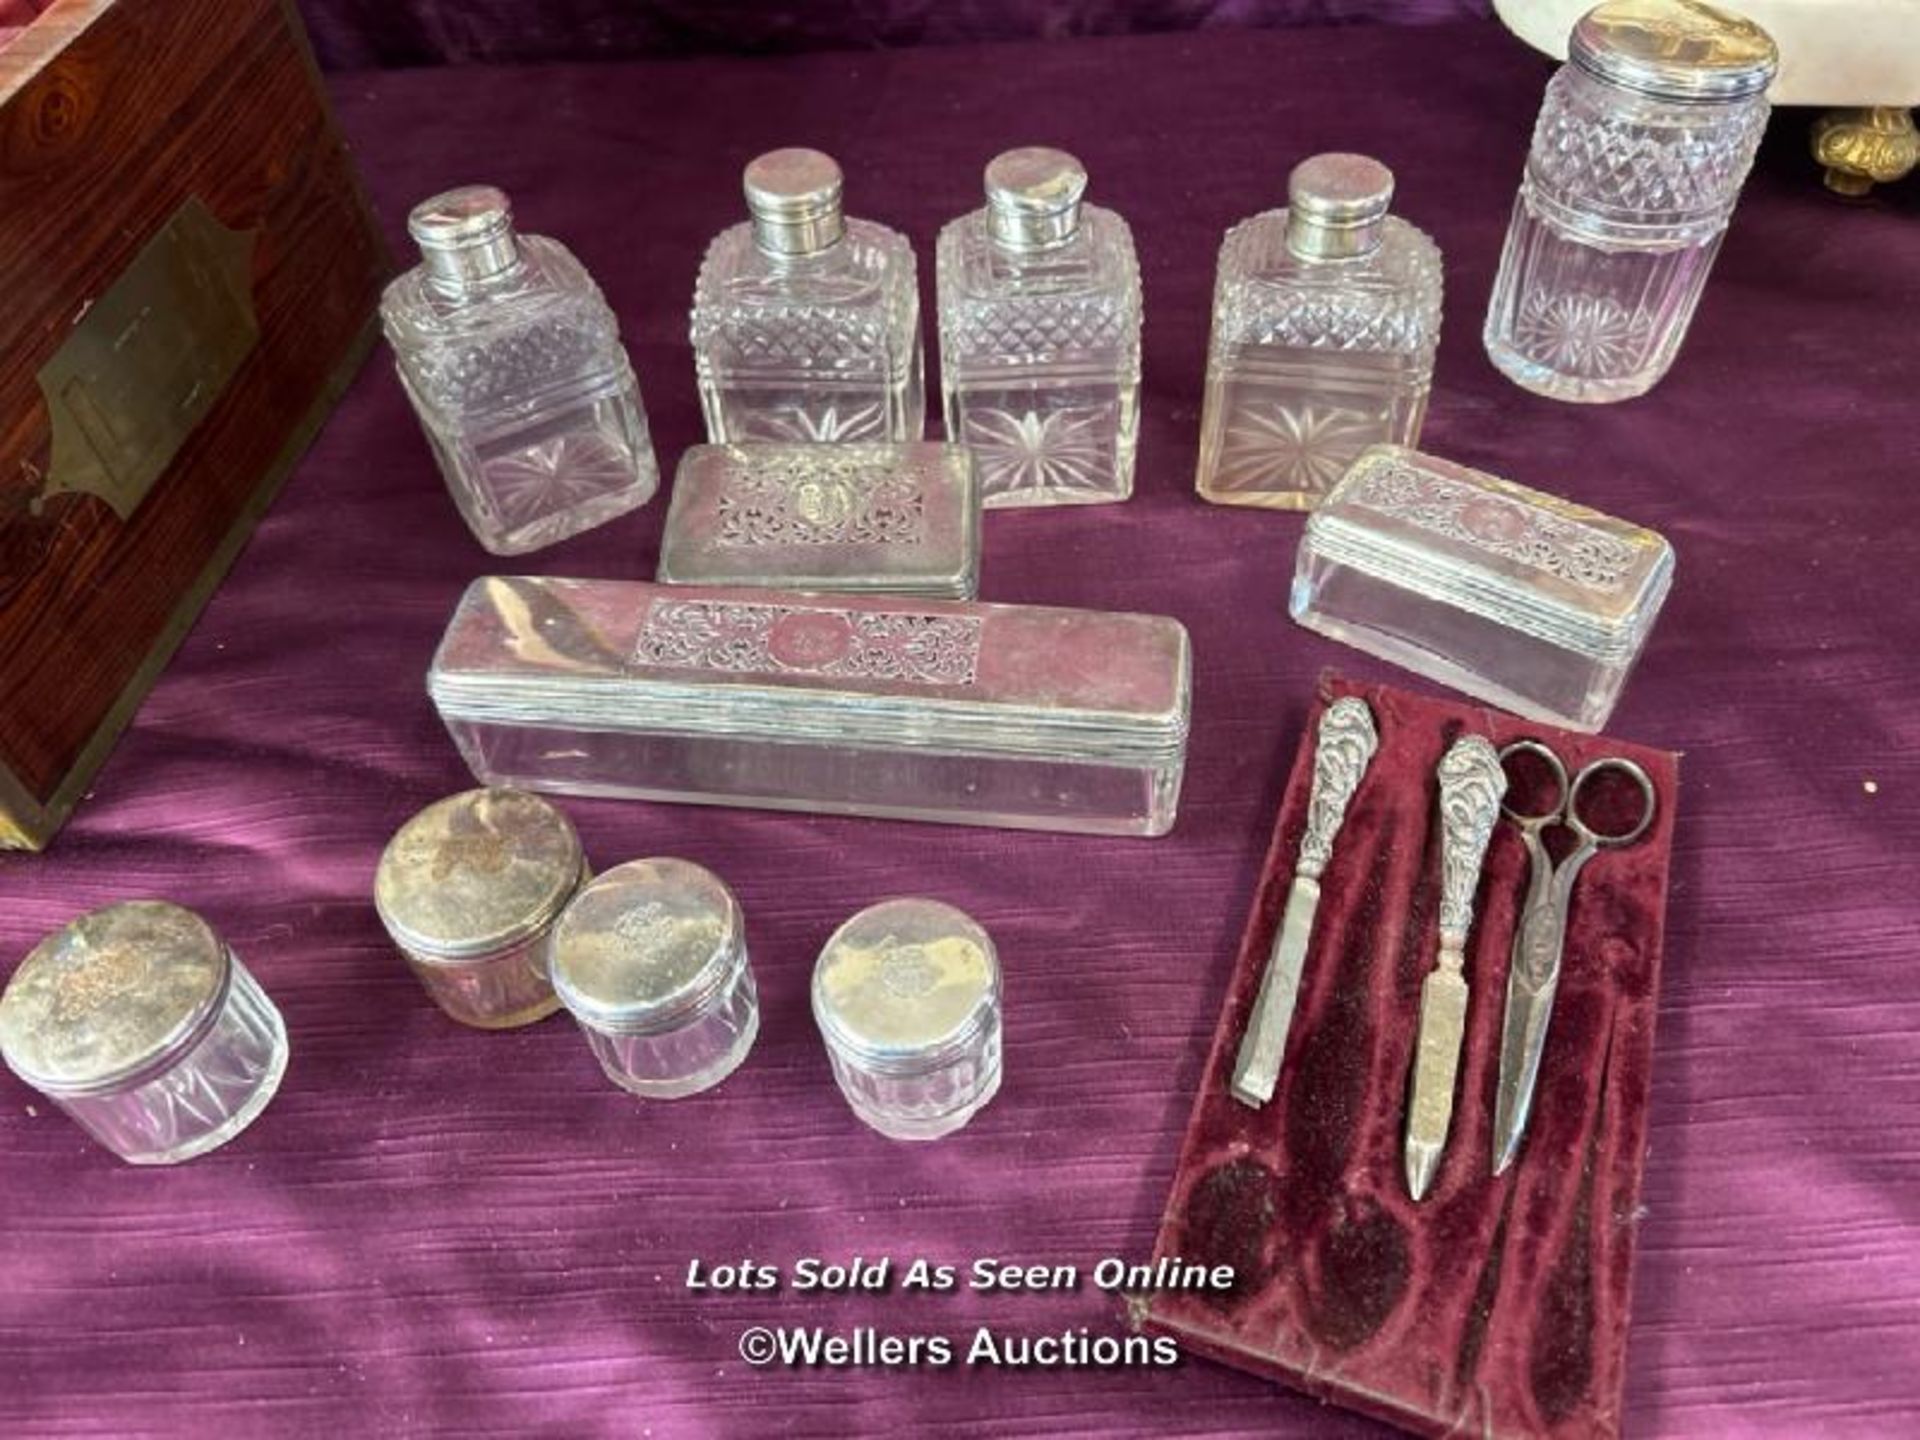 EARLY 19TH CENTURY GENTLEMAN'S VANITY BOX CONTAINING STERLING SILVER AND GLASS CONTAINERS, WITHOUT - Image 4 of 12